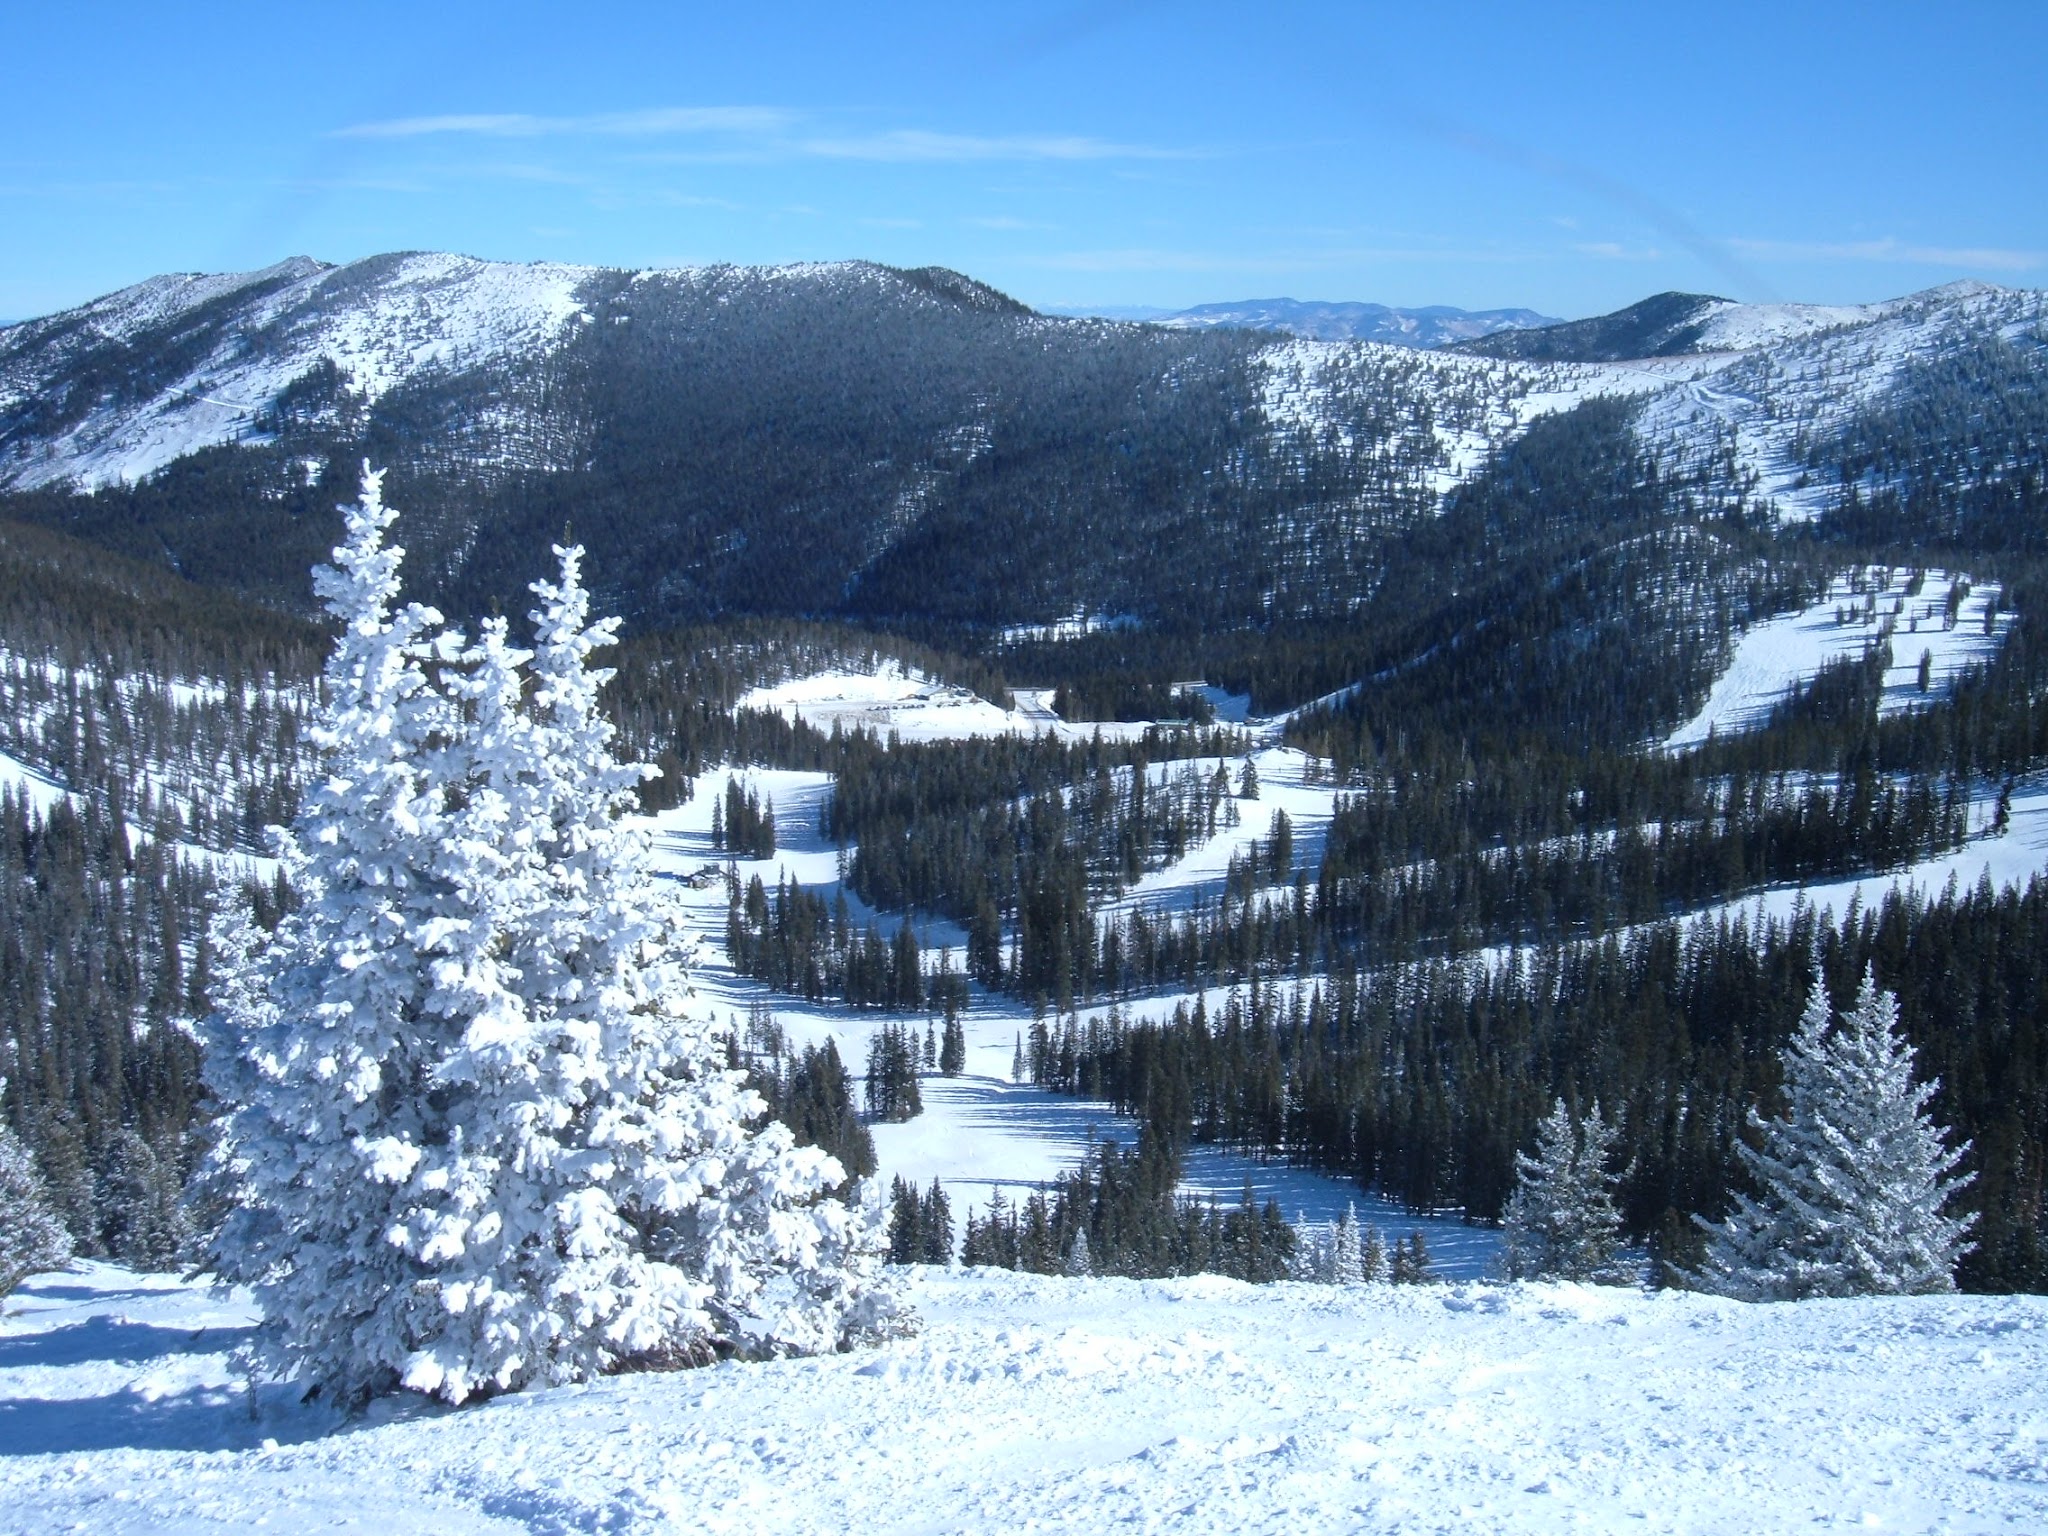 Looking down upon the ski area with snow packed trees on a sunny day.